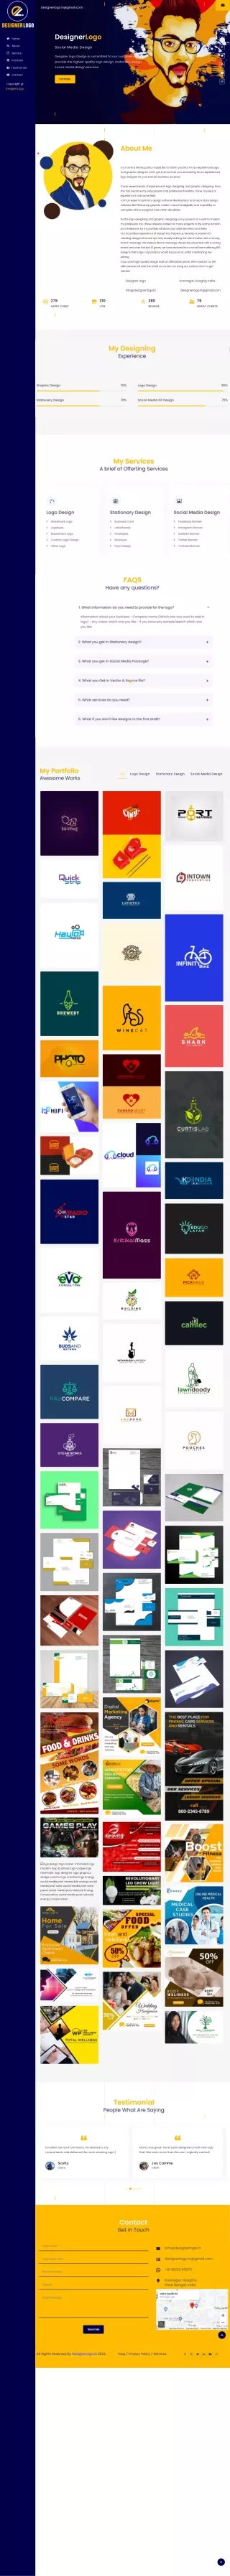 How To Design A Professional Logo For Your Brand Or Business